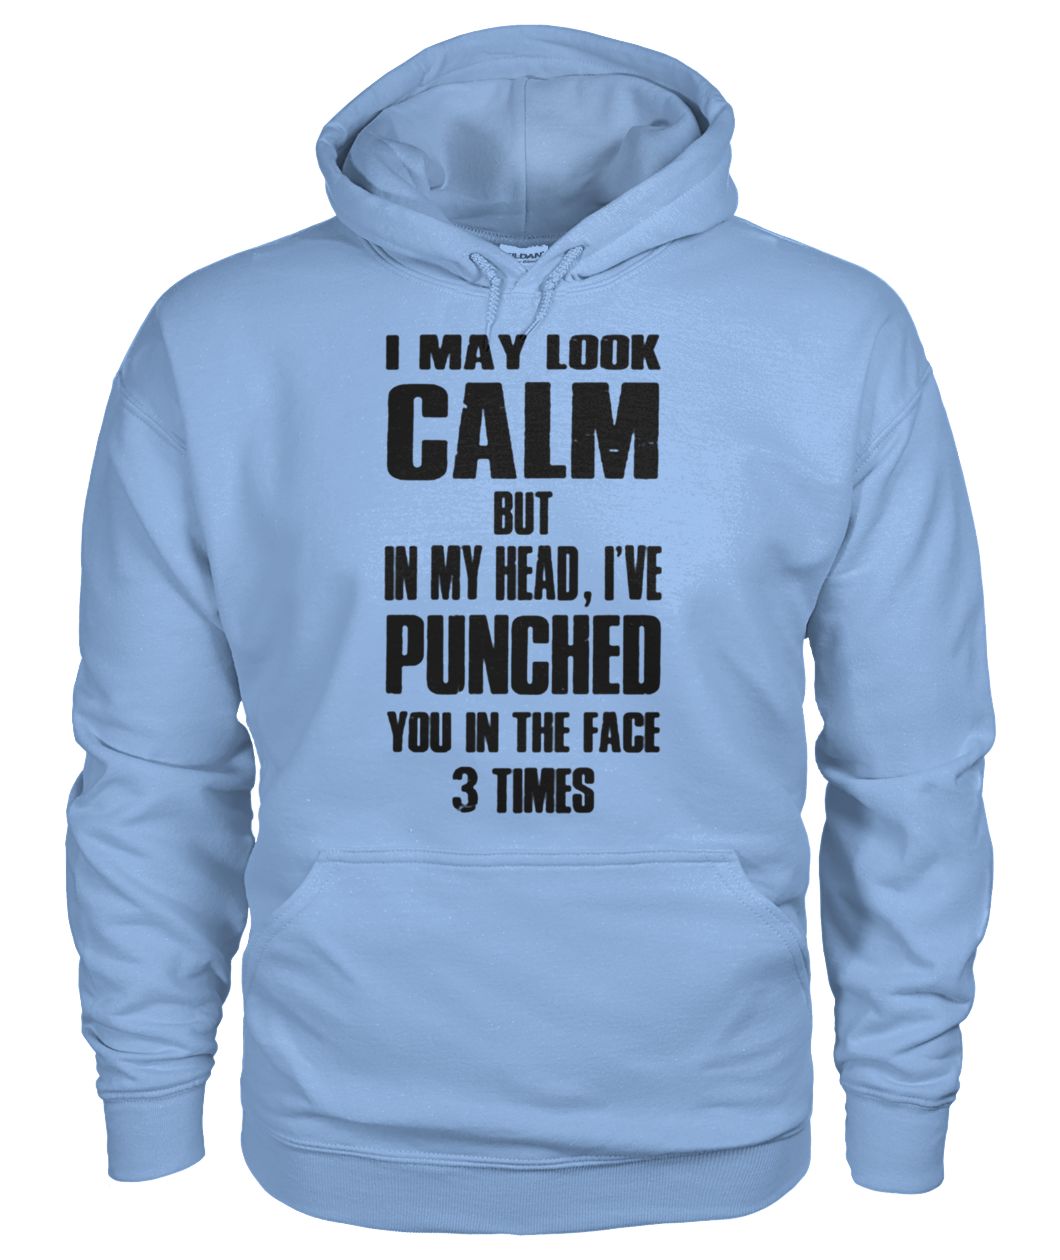 I may look calm but in my head I've punched you in your face 3 times gildan hoodie